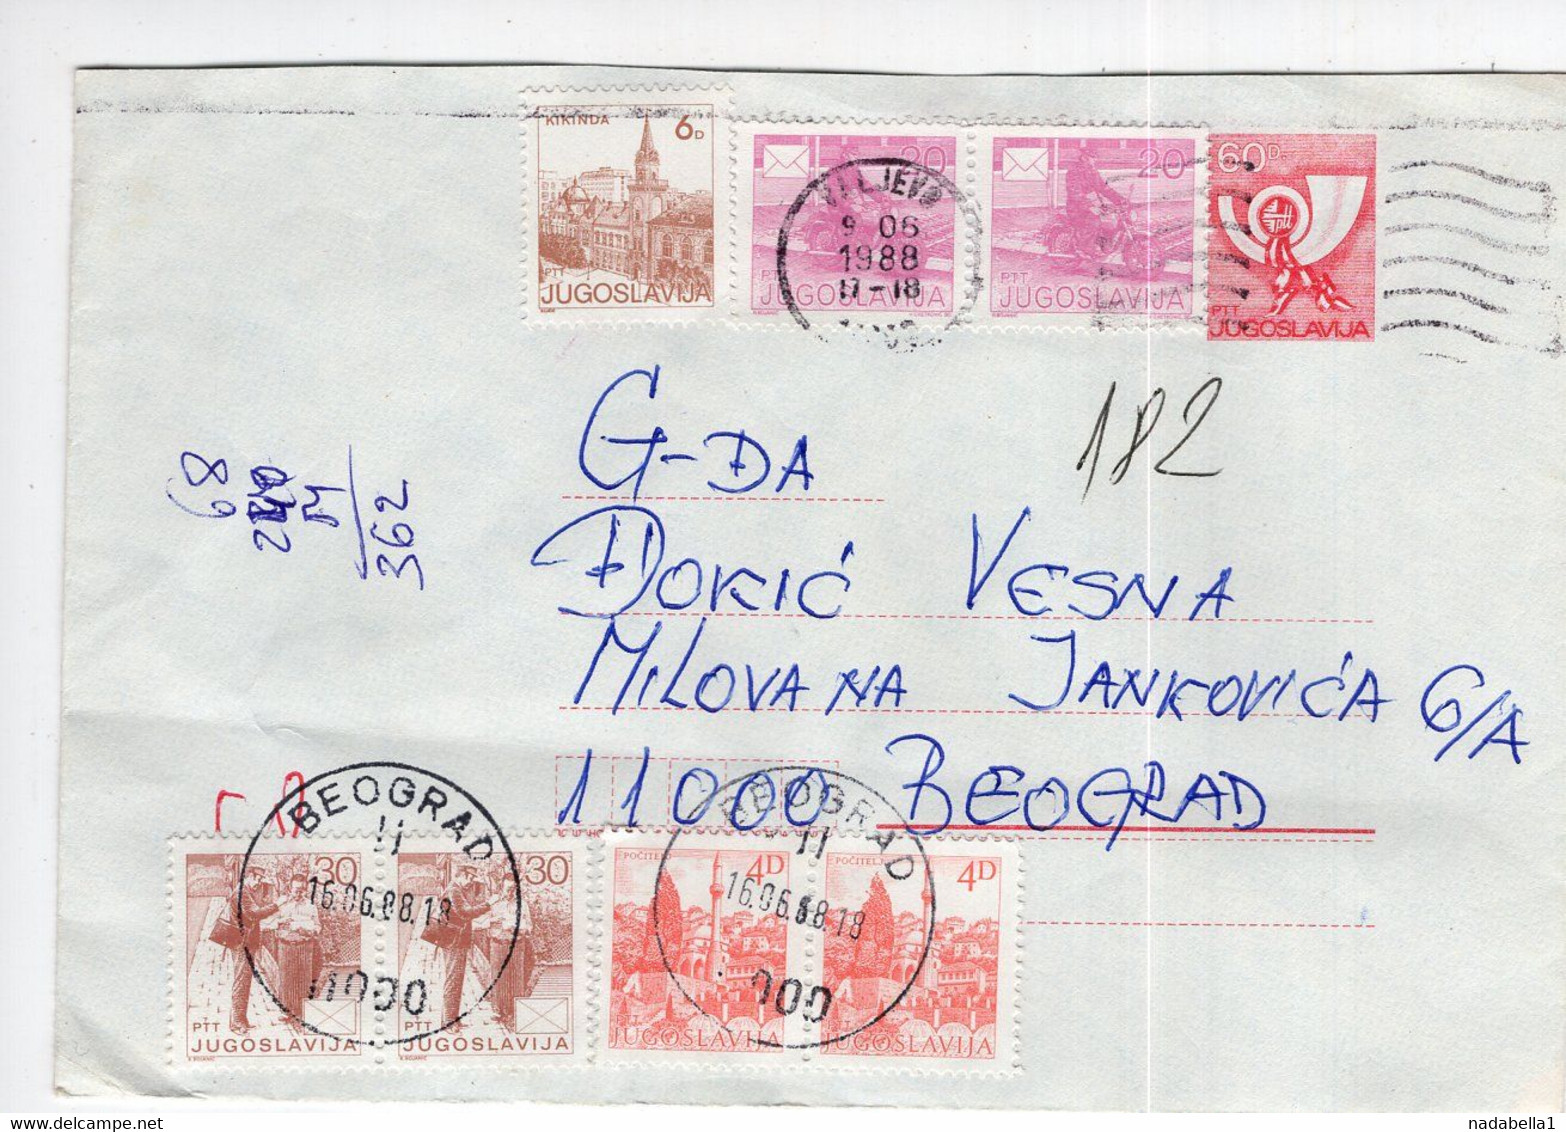 2008. YUGOSLAVIA,SERBIA,VALJEVO,STATIONERY COVER,USED,38 DIN. POSTAGE DUE PAID IN BELGRADE - Timbres-taxe